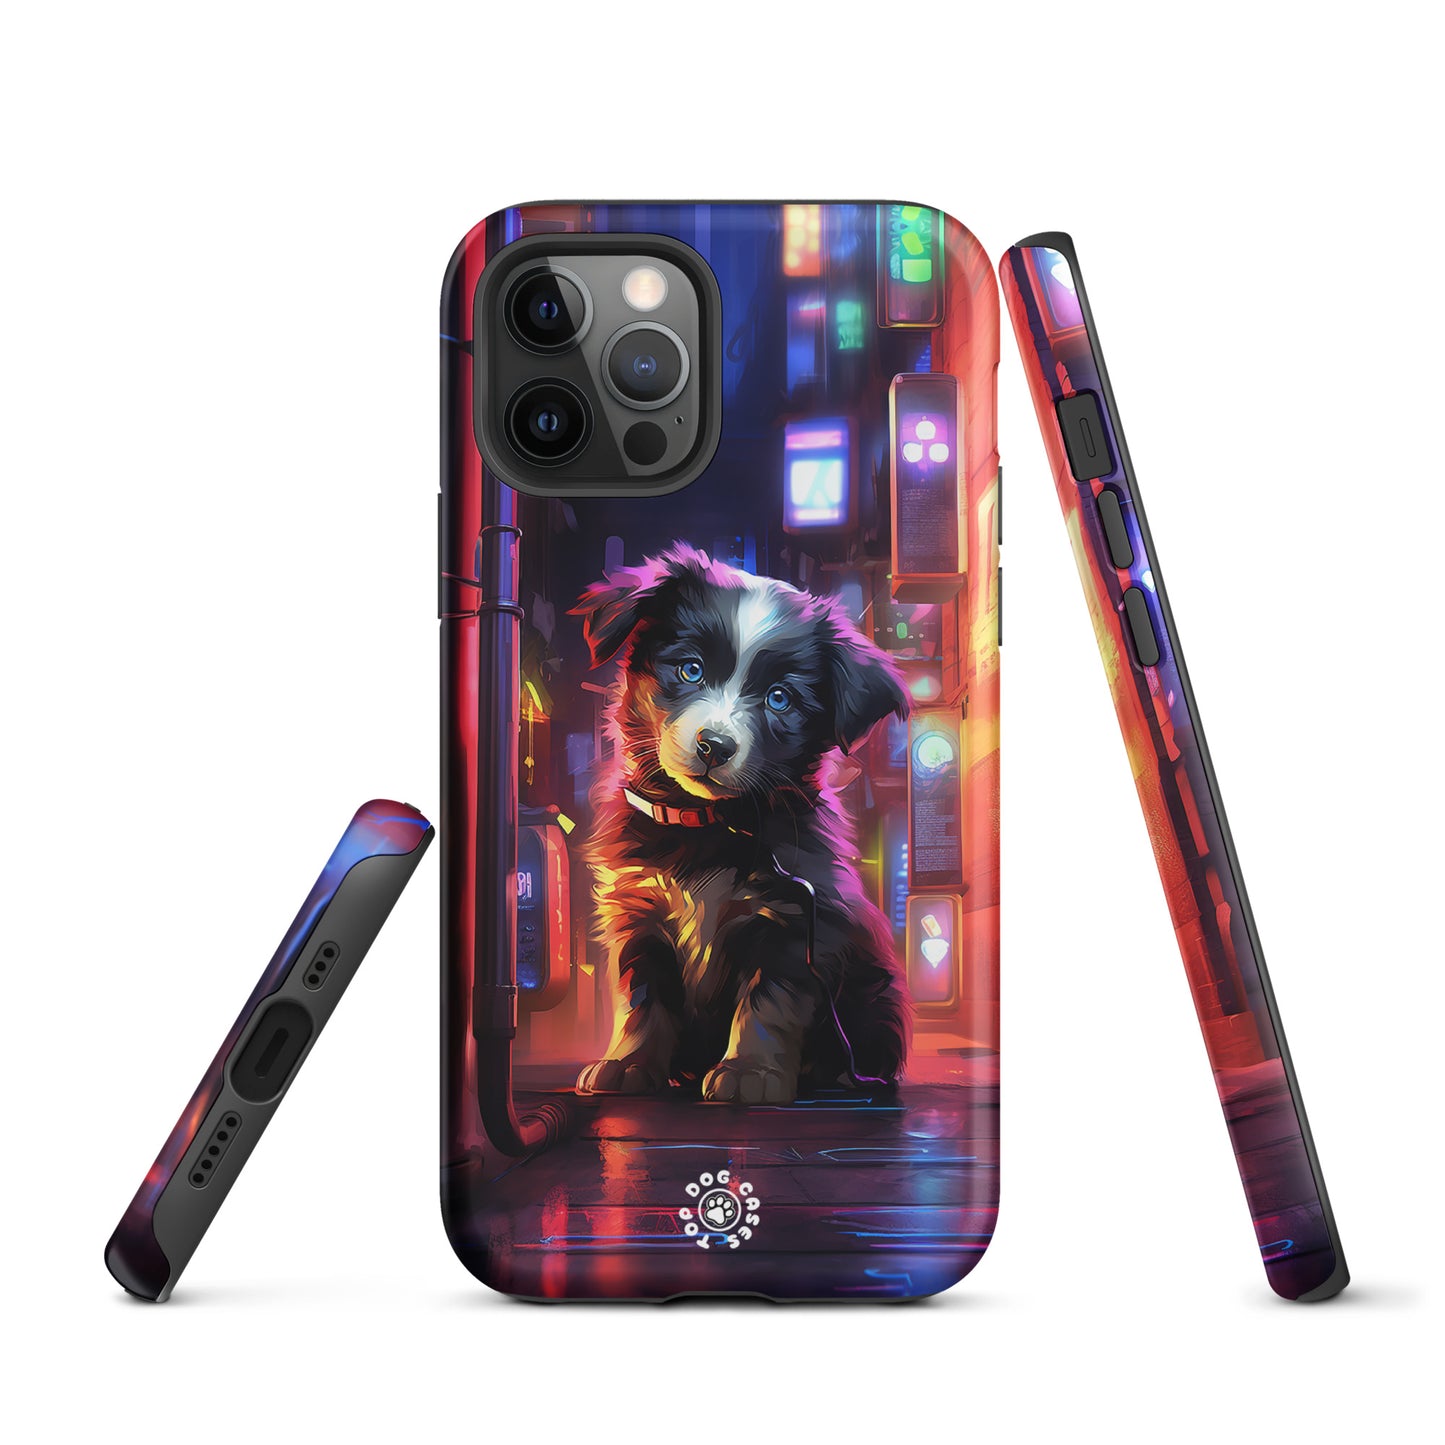 Border Collie in the City - iPhone Case - Cute Phone Cases - Top Dog Cases - #Border Collie, #BorderCollie, #BorderCollieCase, #CityDog, #CityDogs, #iPhone, #iPhone11, #iphone11case, #iPhone12, #iPhone12case, #iPhone13, #iPhone13case, #iPhone13DogCase, #iPhone13Mini, #iPhone13Pro, #iPhone13ProMax, #iPhone14, #iPhone14case, #iPhone14DogCase, #iPhone14Plus, #iPhone14Pluscase, #iPhone14Pro, #iPhone14ProMax, #iPhone14ProMaxCase, #iPhone15, #iPhone15case, #iPhonecase, #iphonedogcase